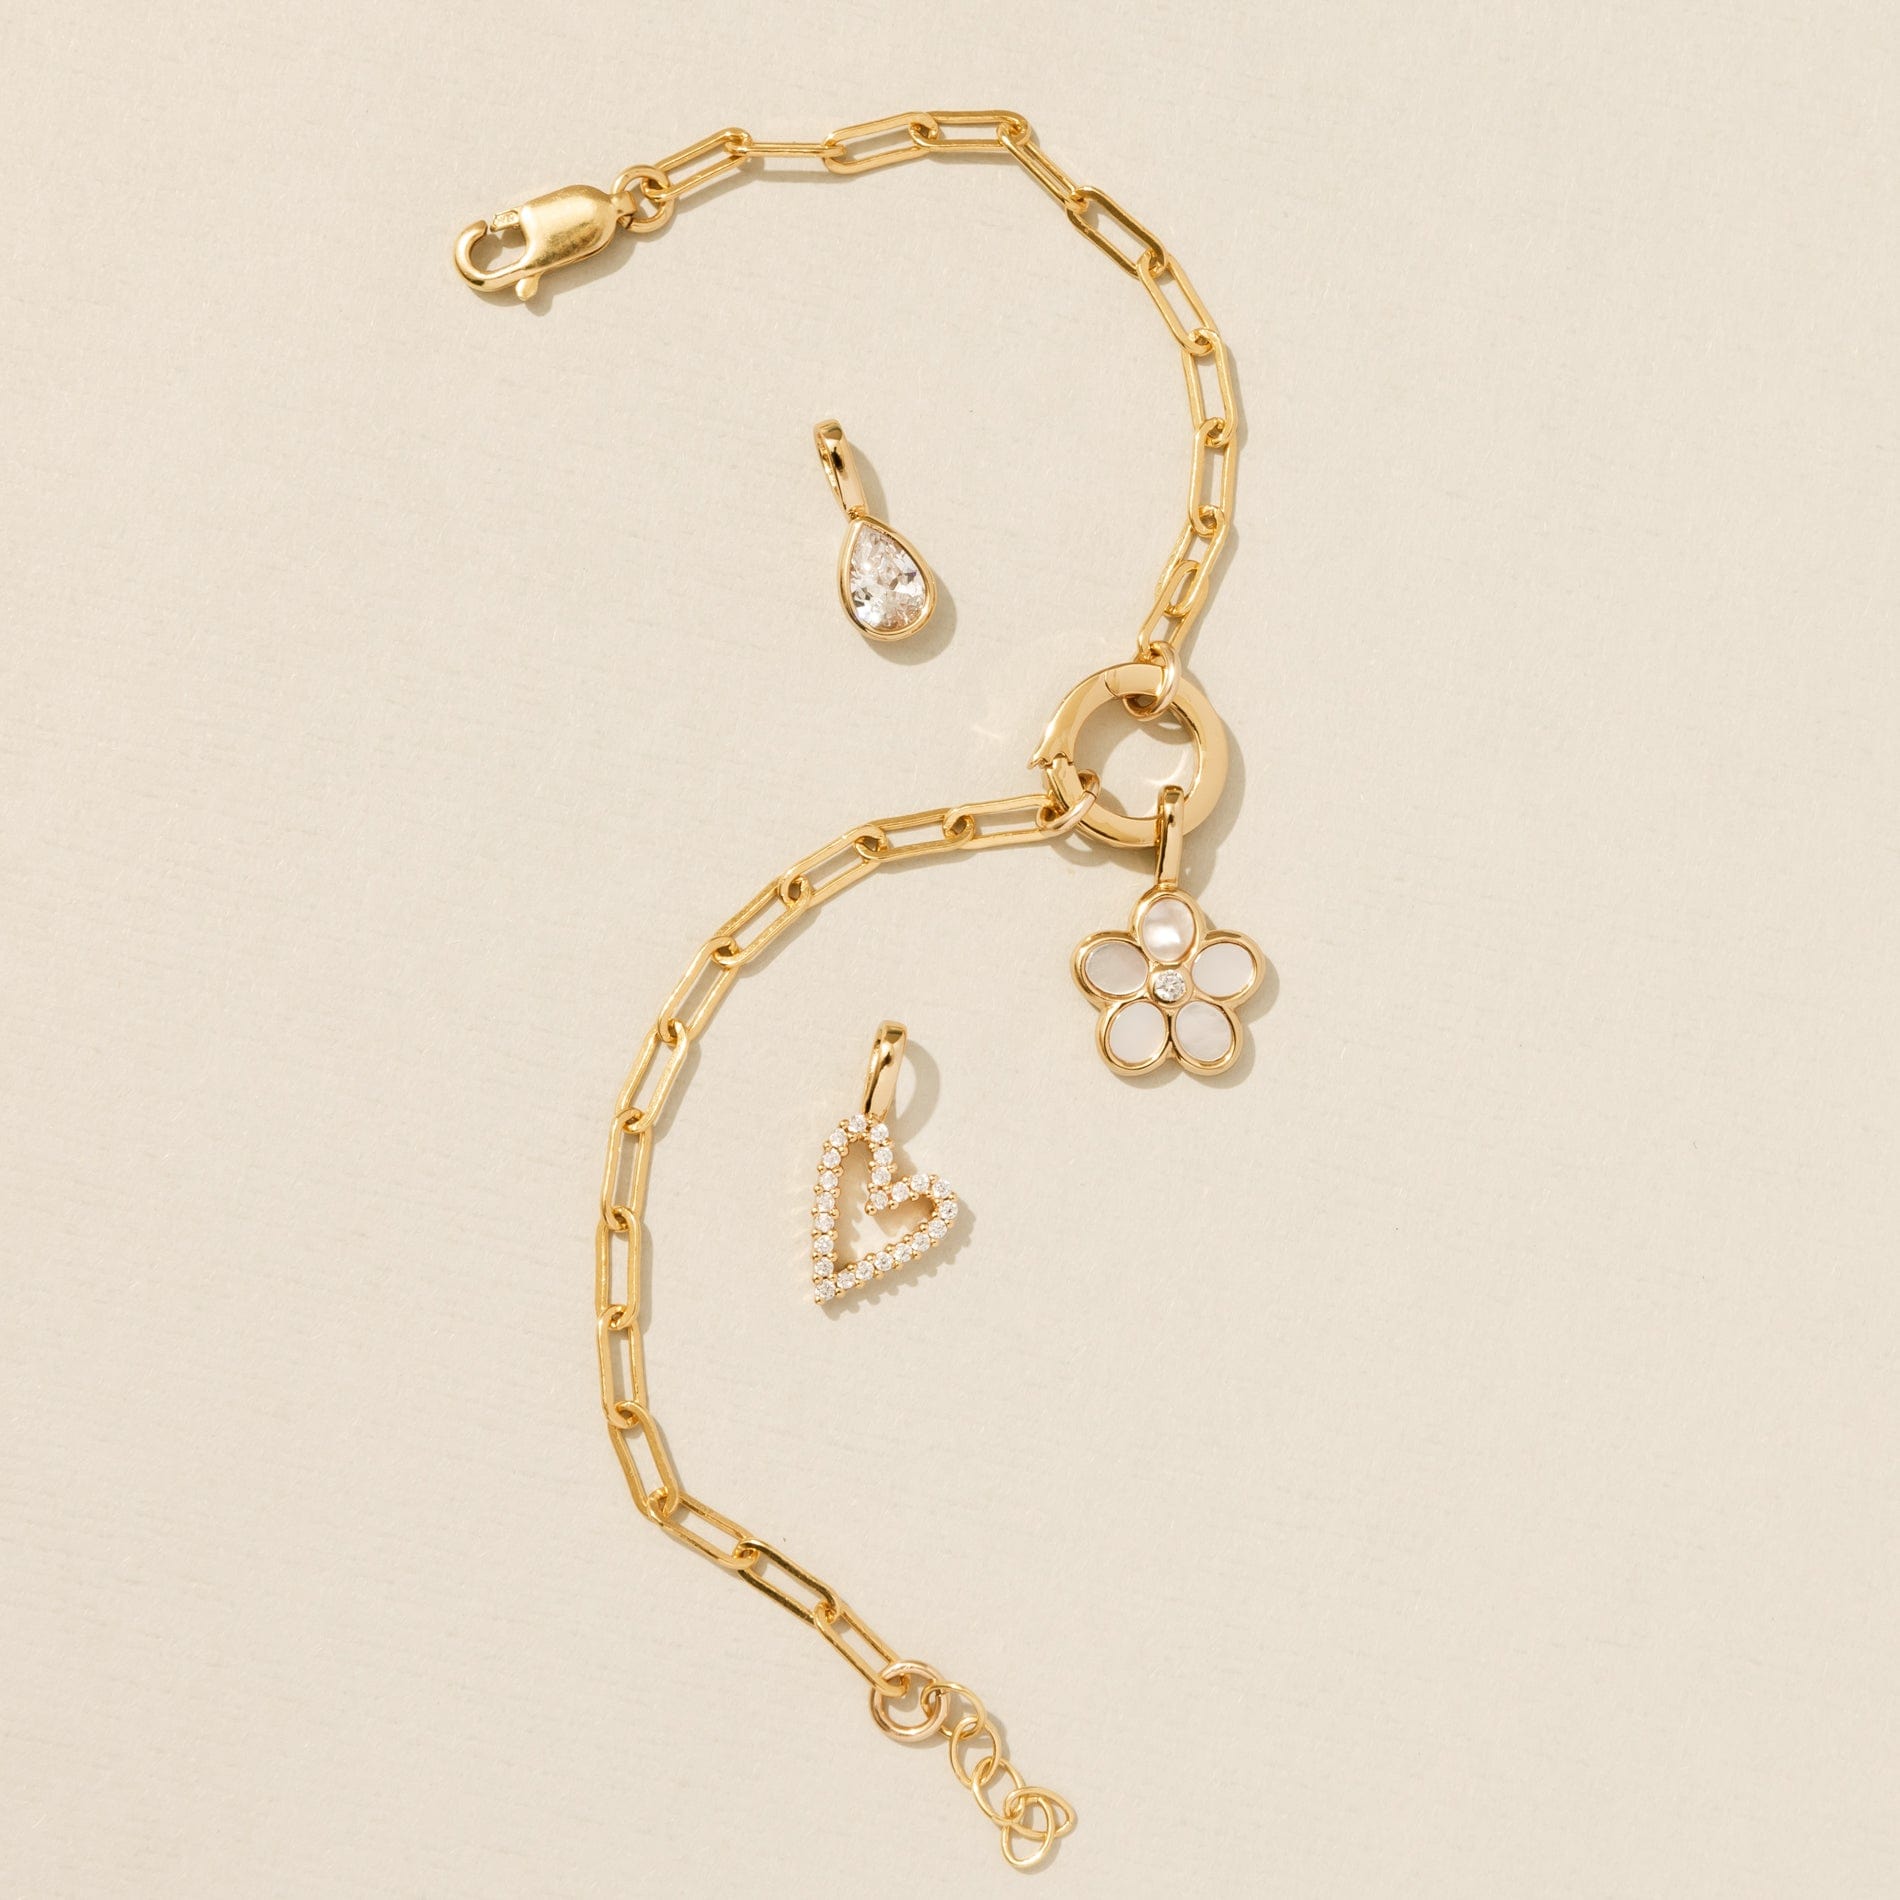 Louis Vuitton Charm Link White Gold Bracelet With Charms at